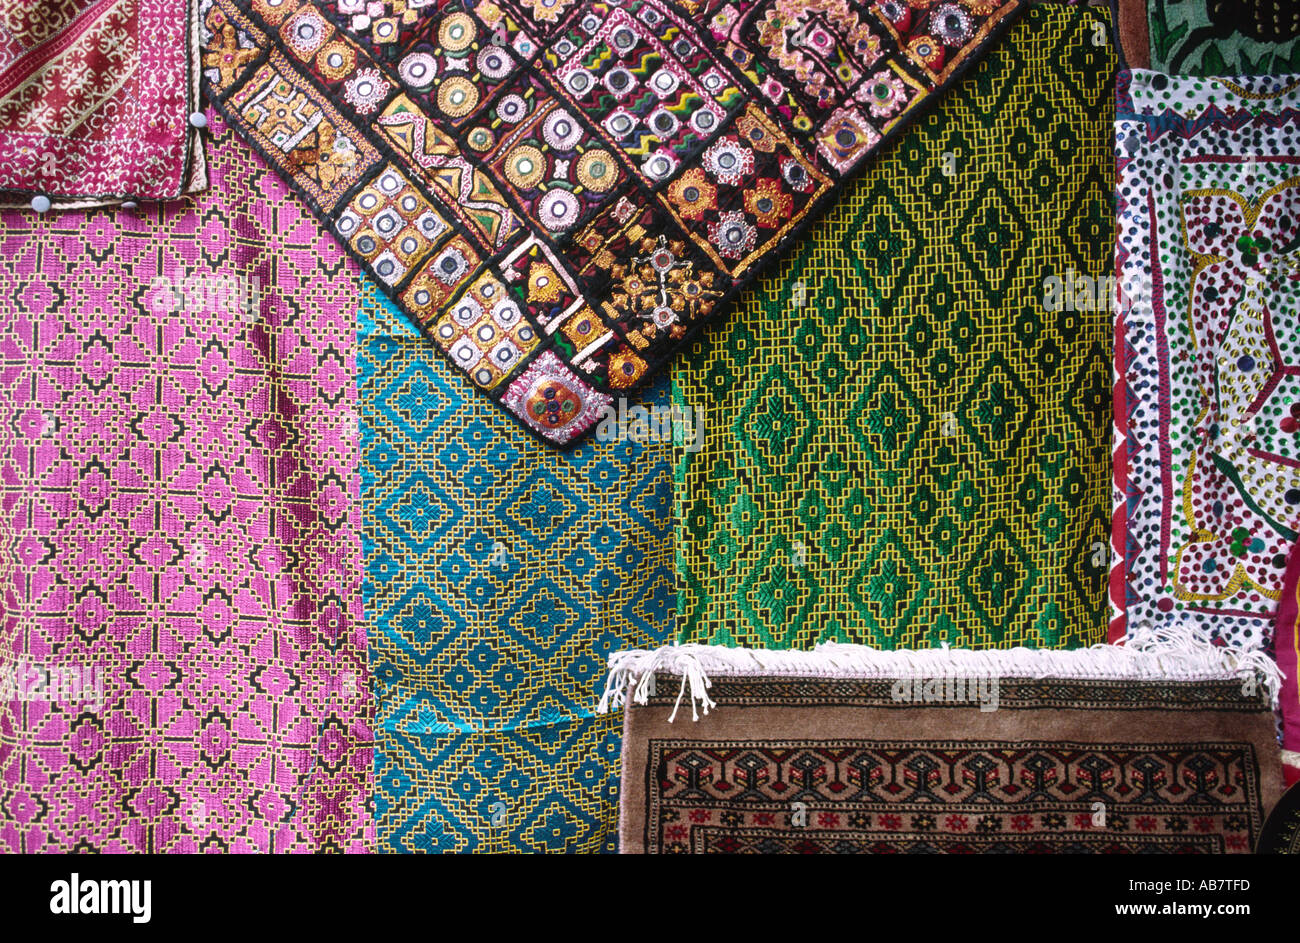 Pakistan Crafts collection of Pakistani textile craft objects Stock